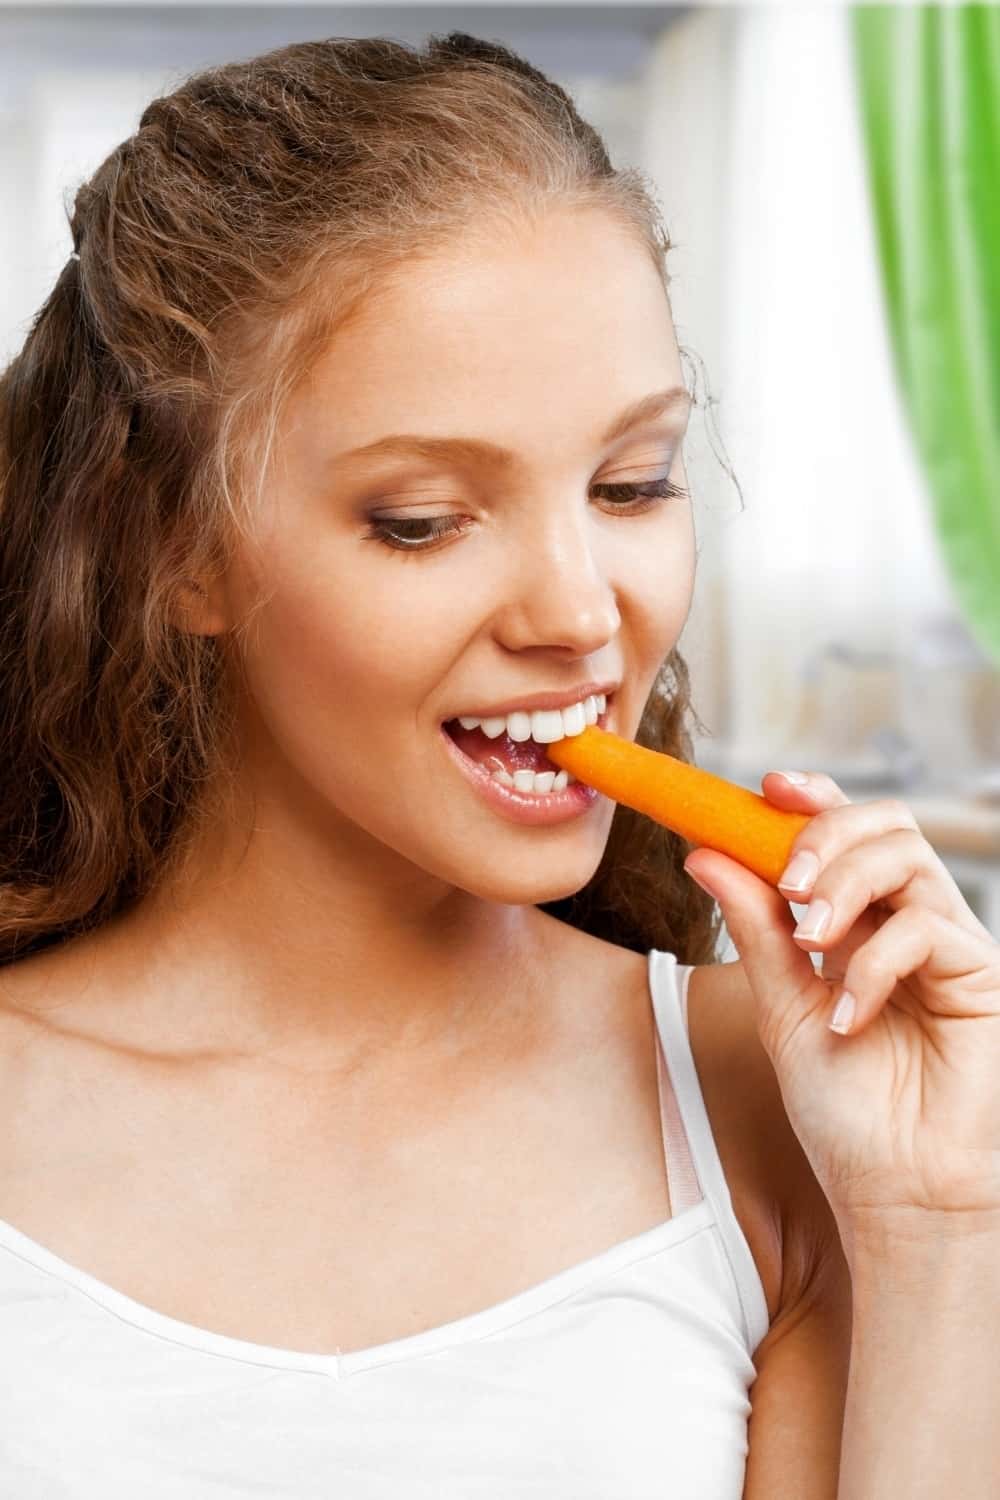 the woman is eating a fresh carrot